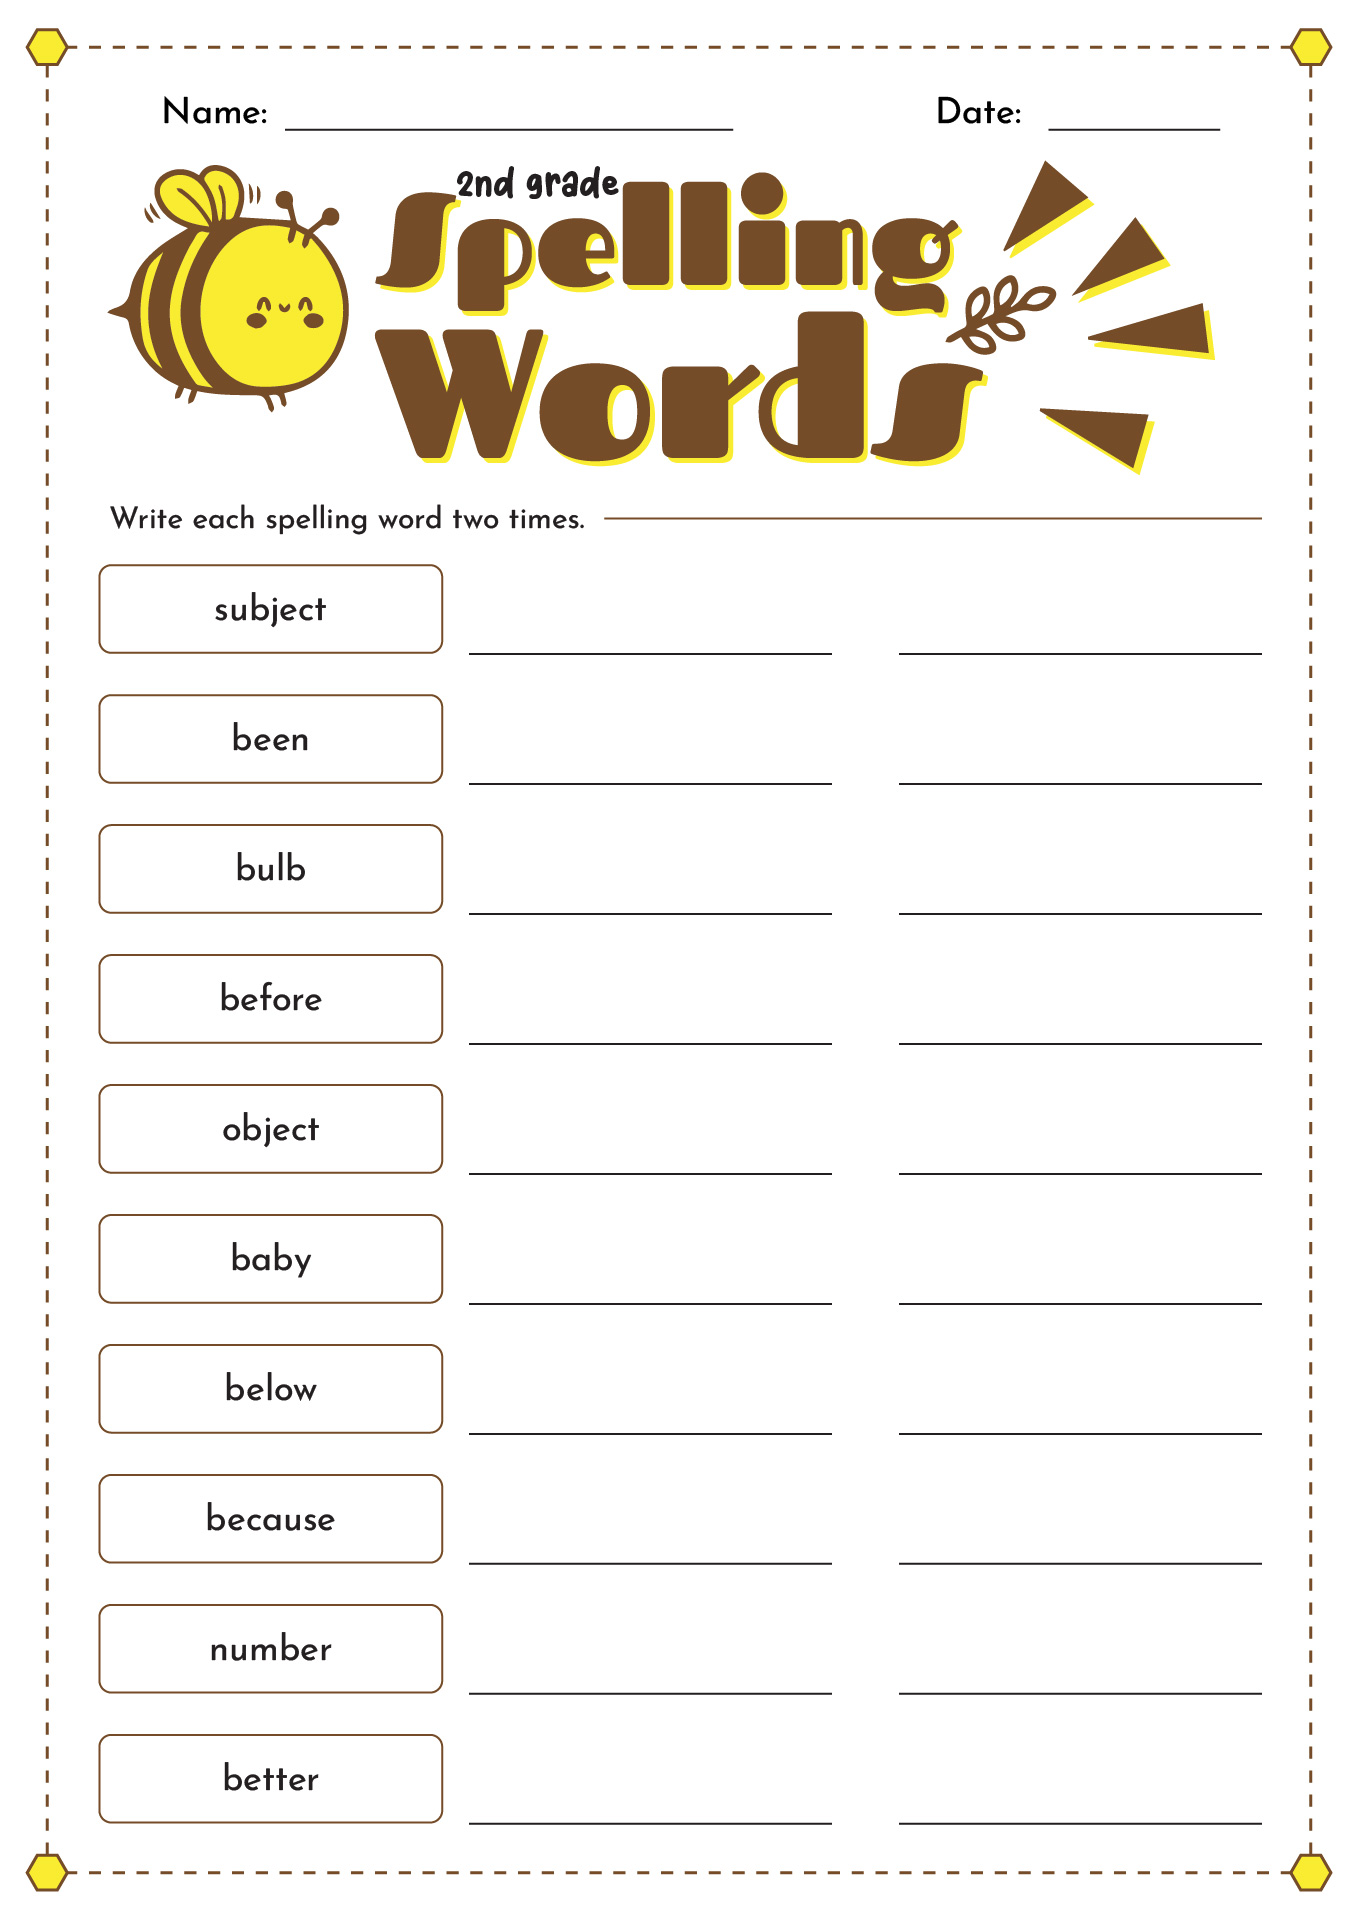 17 Images of 8th Grade Spelling Worksheets